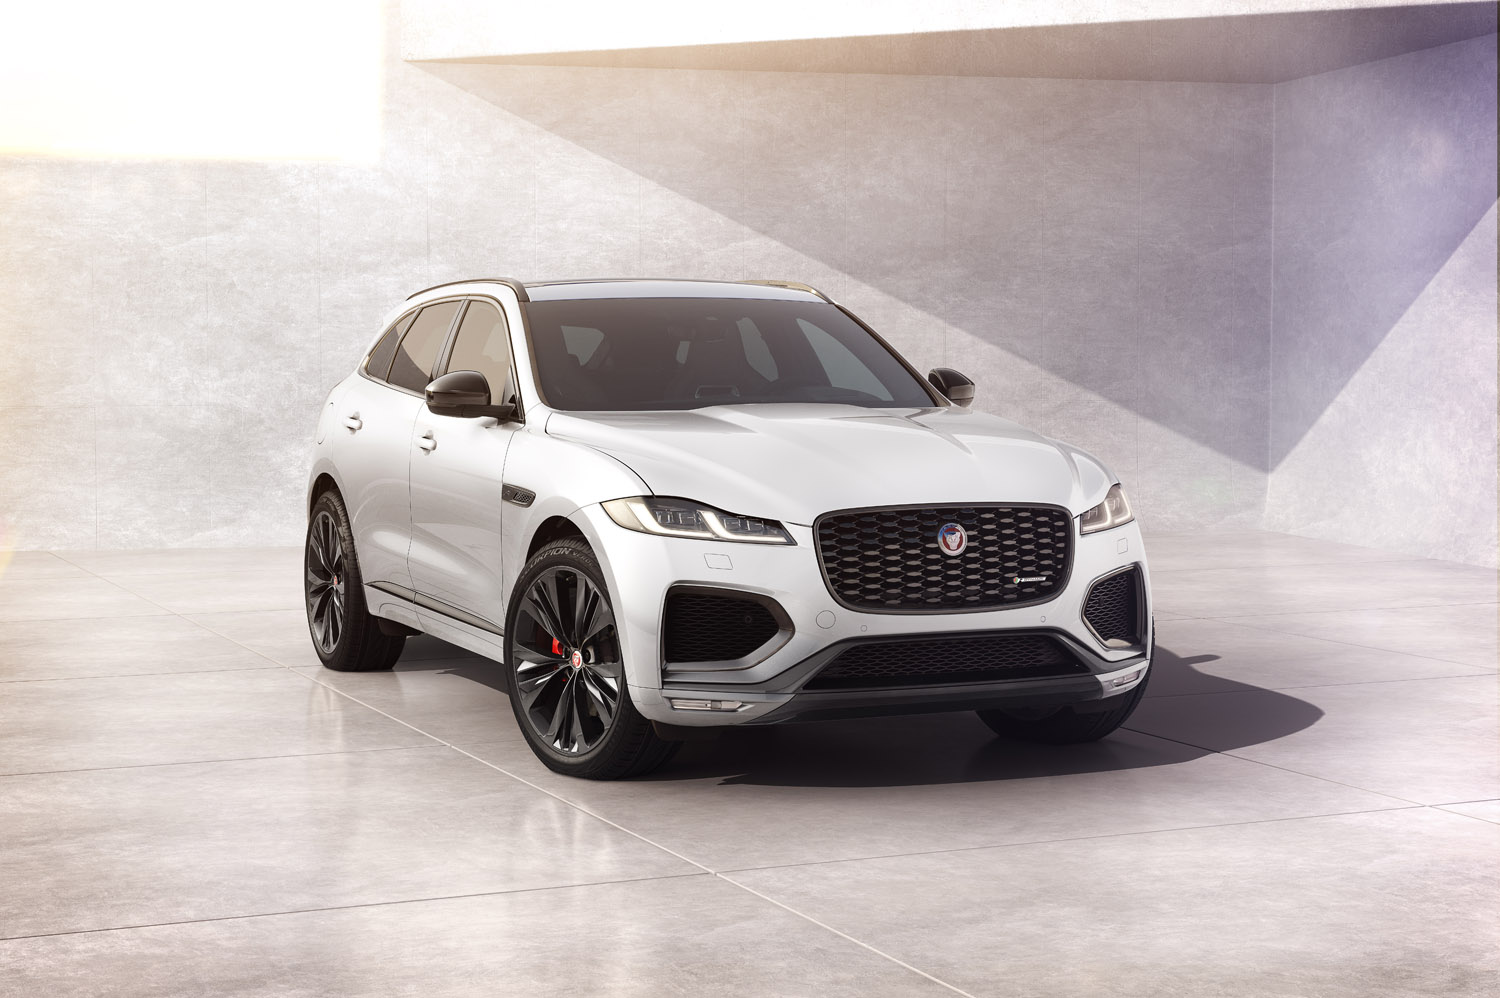 Jag_F-PACE_22MY_02_R-Dynamic_Black_Exterior_Front_3-4_110821.jpg